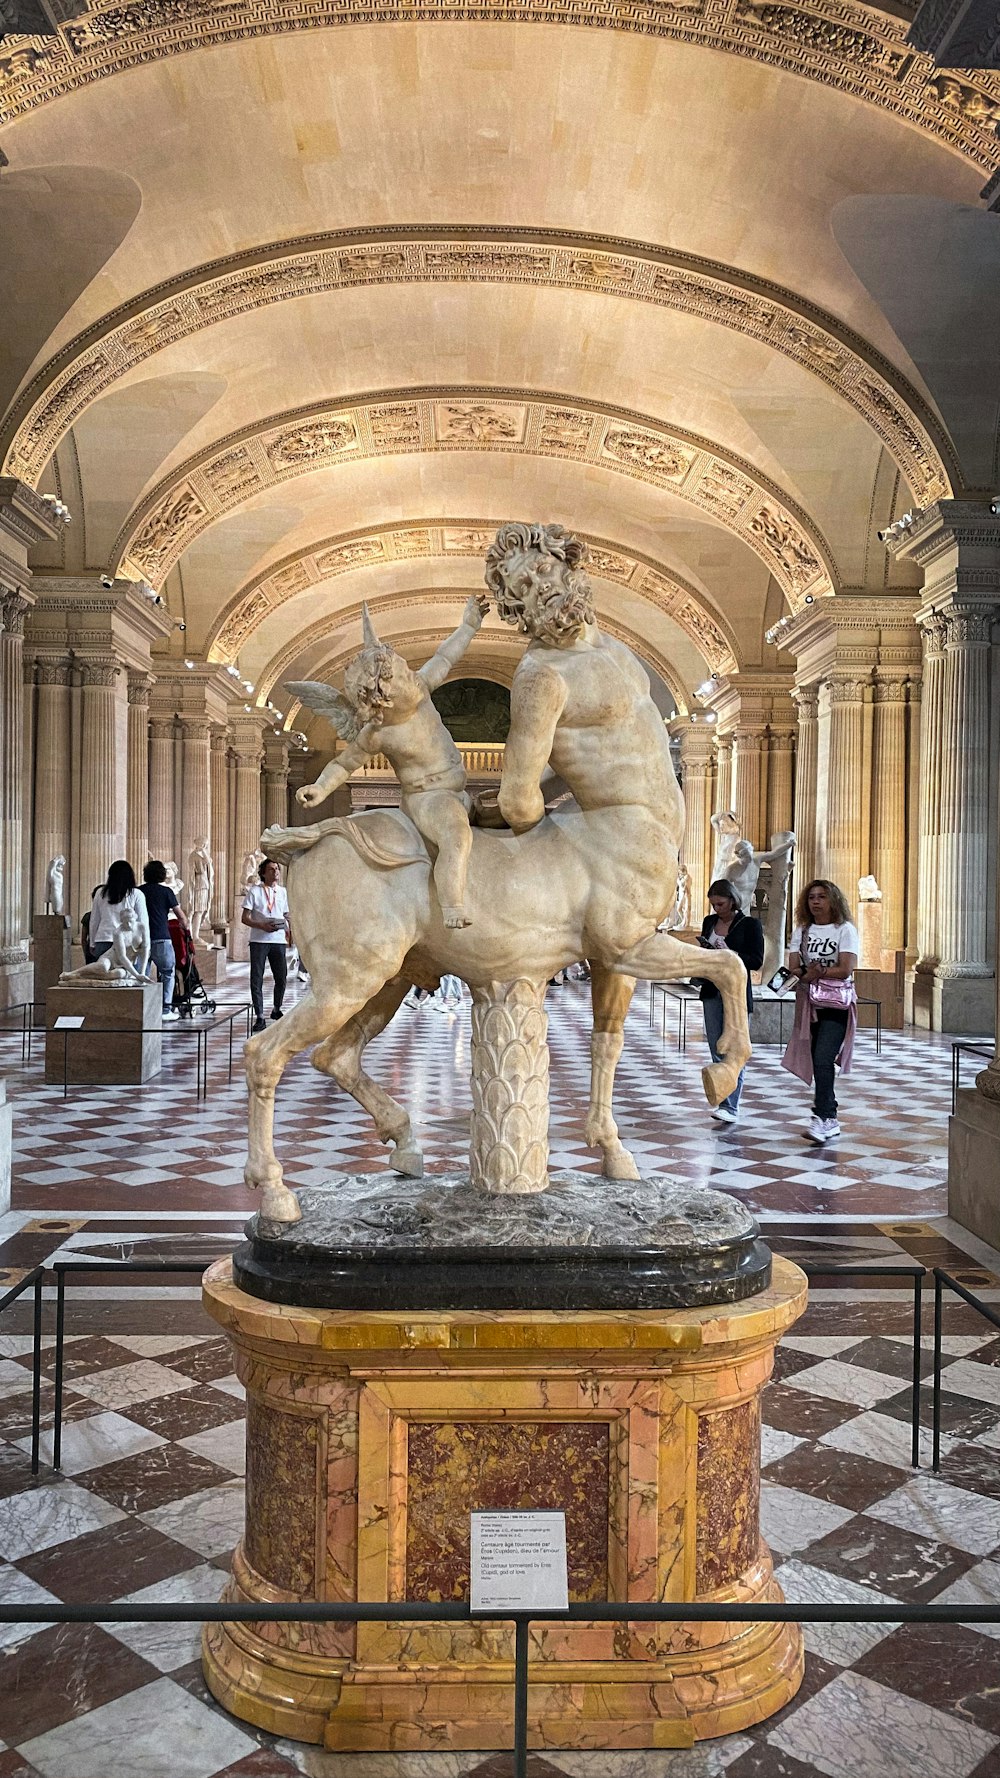 a statue of a man on a horse in a building